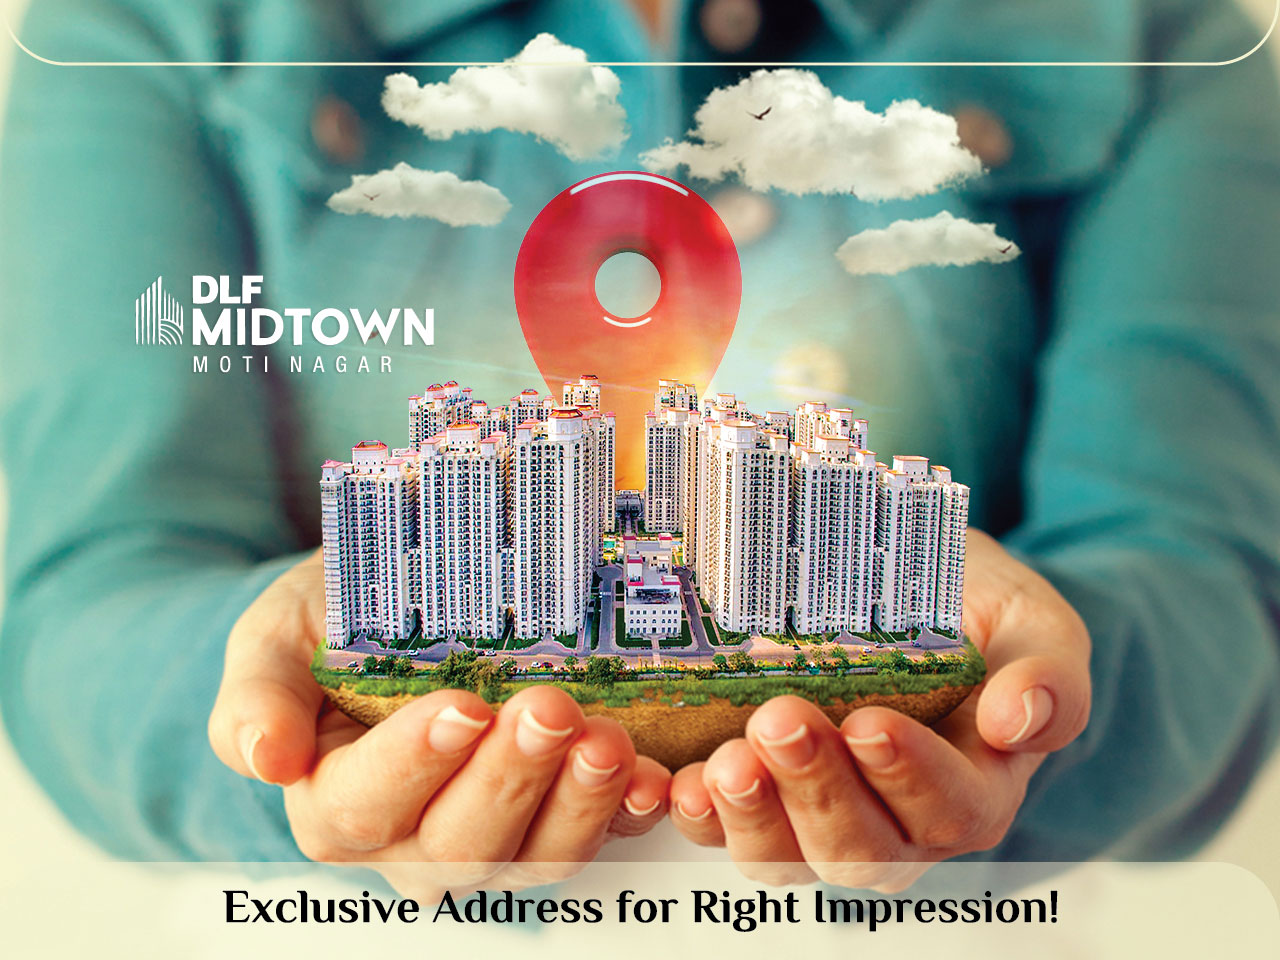 DLF One Midtown Delhi – Exclusive Address for Right Impression